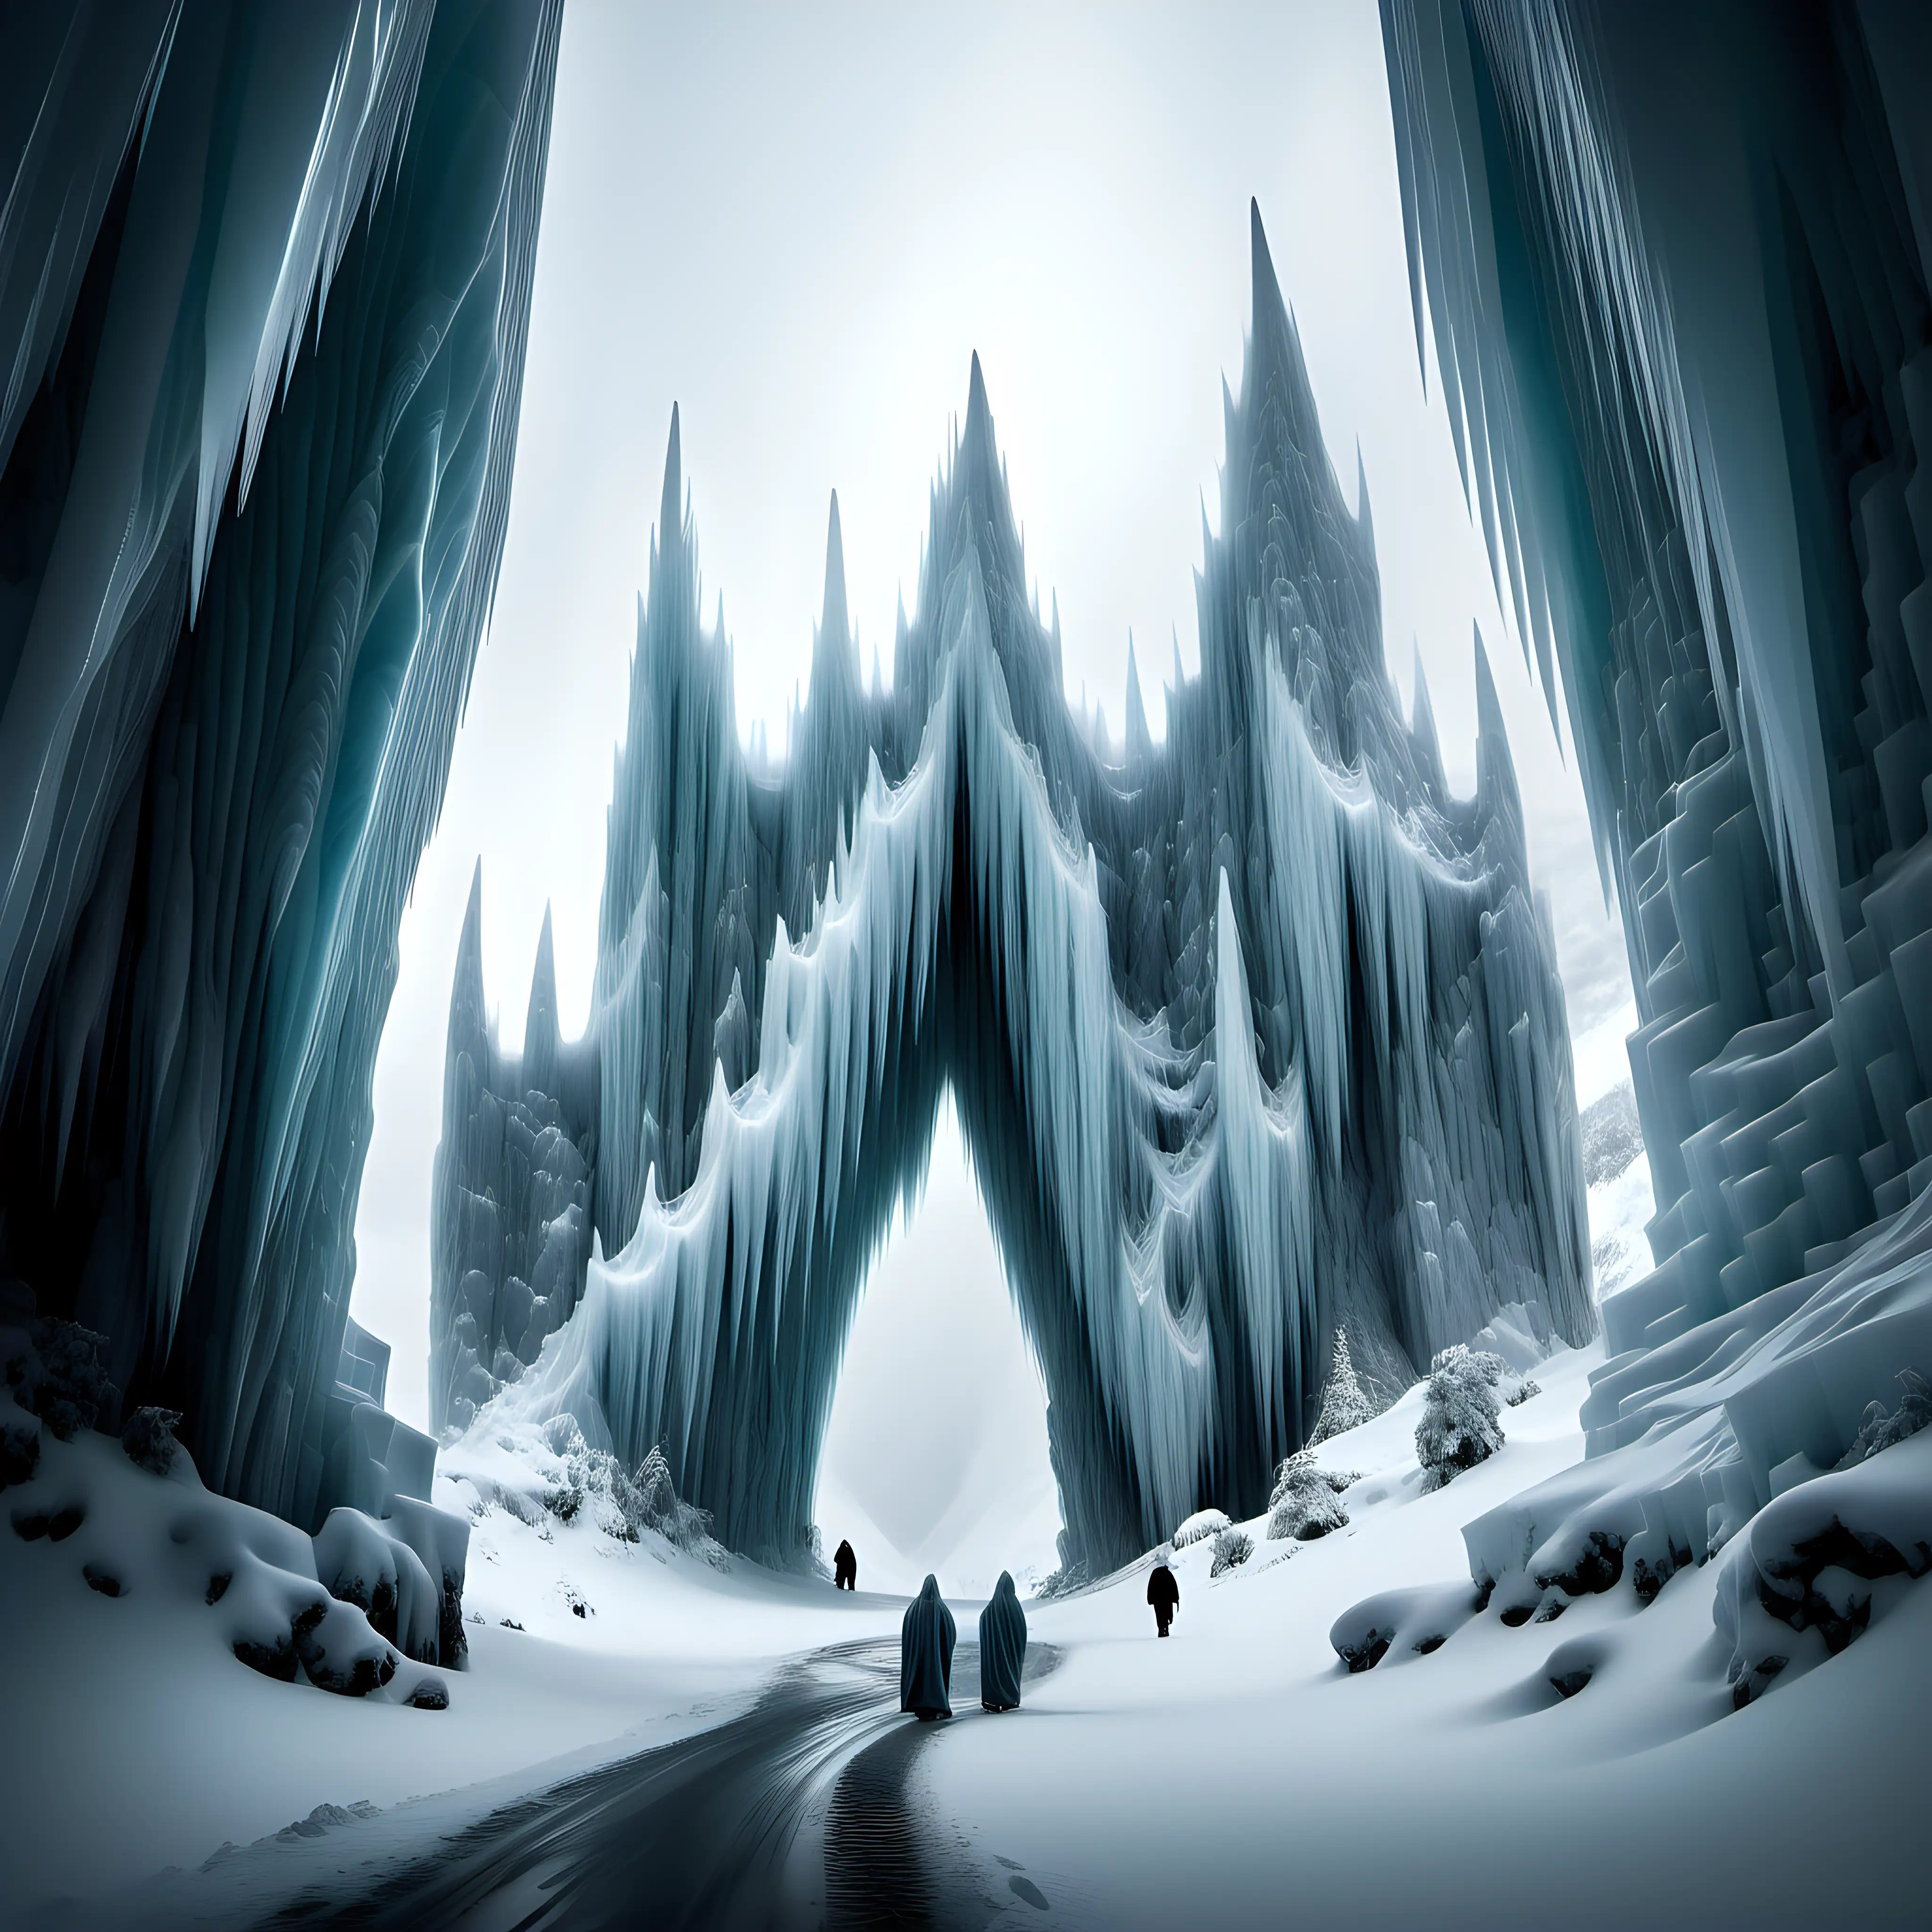 Mystical Snowstorm Adventure Cloaked Figures in Ice Castle Mountains